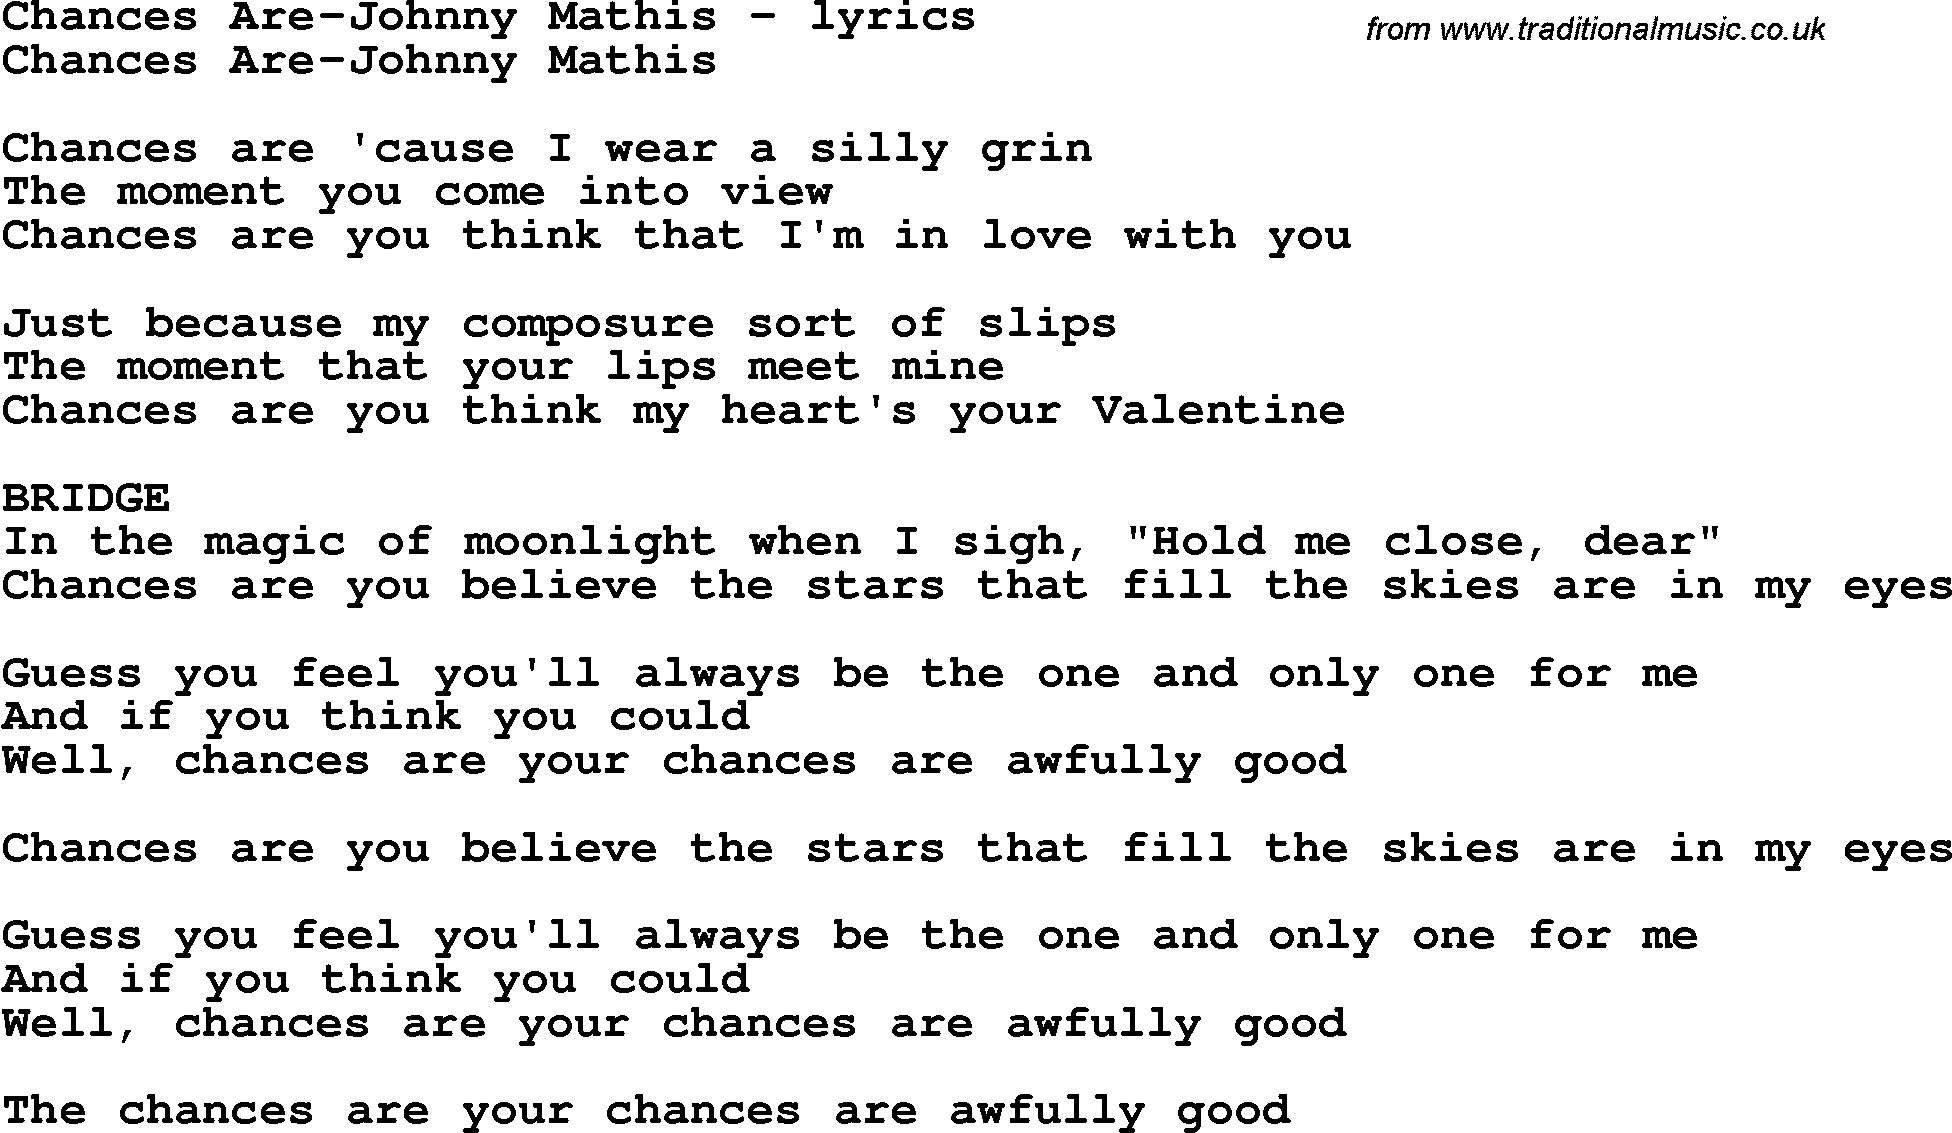 Love Song Lyrics for: Chances Are-Johnny Mathis